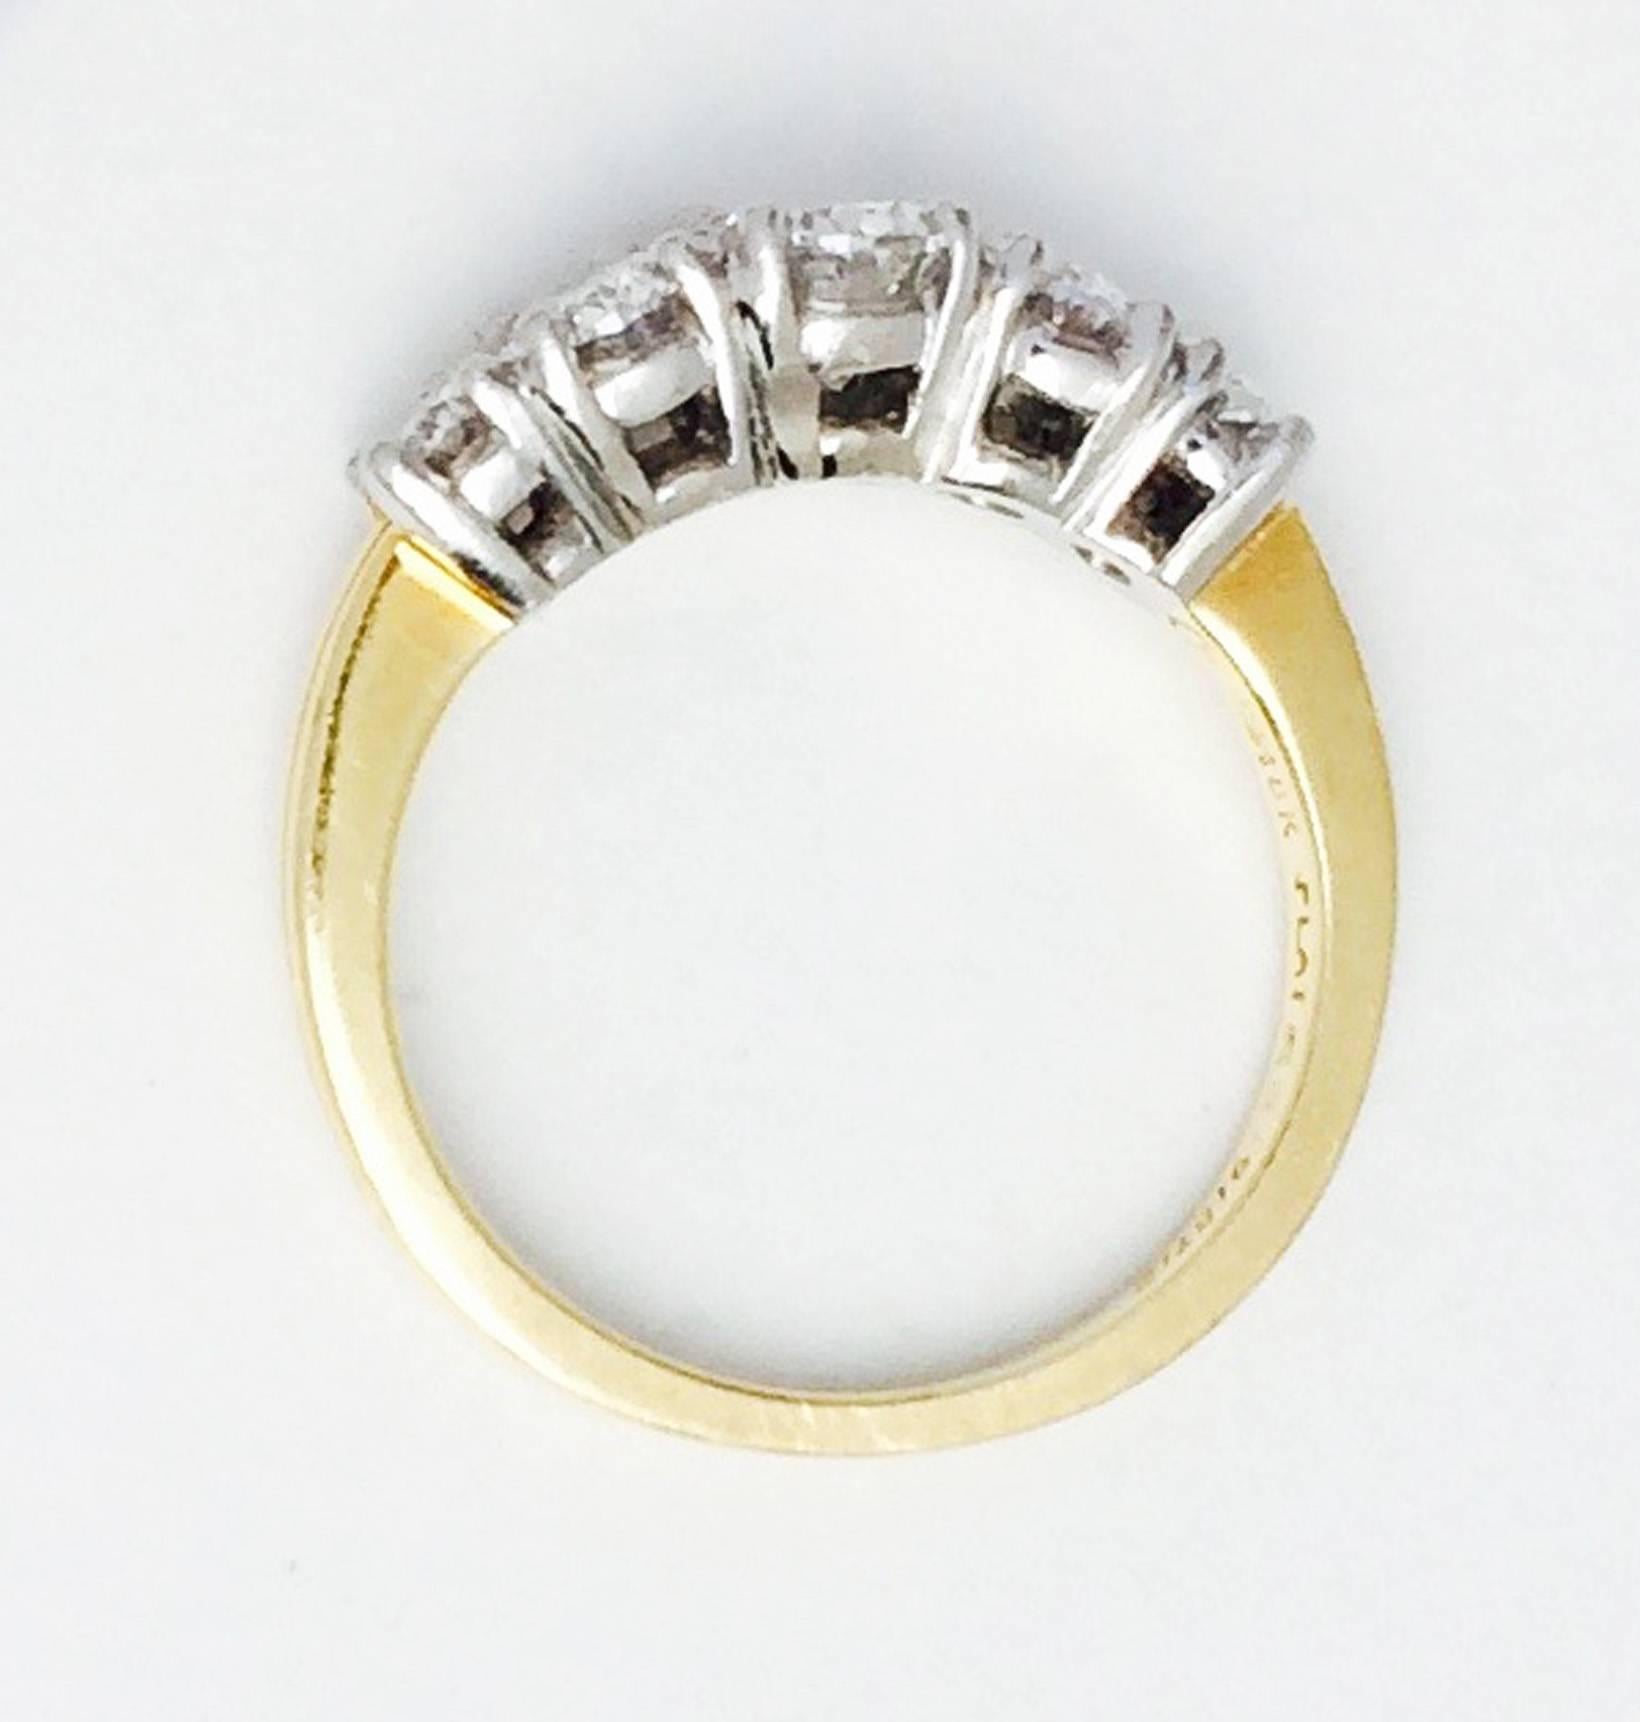 A fine and rare Cartier Paris five-stone diamond ring. Signed sculpted yellow gold band features a platinum setting and five sparkling oval cut E VVS diamonds, approx. 3.5ctw. Size 4.75. Excellent with no issues.